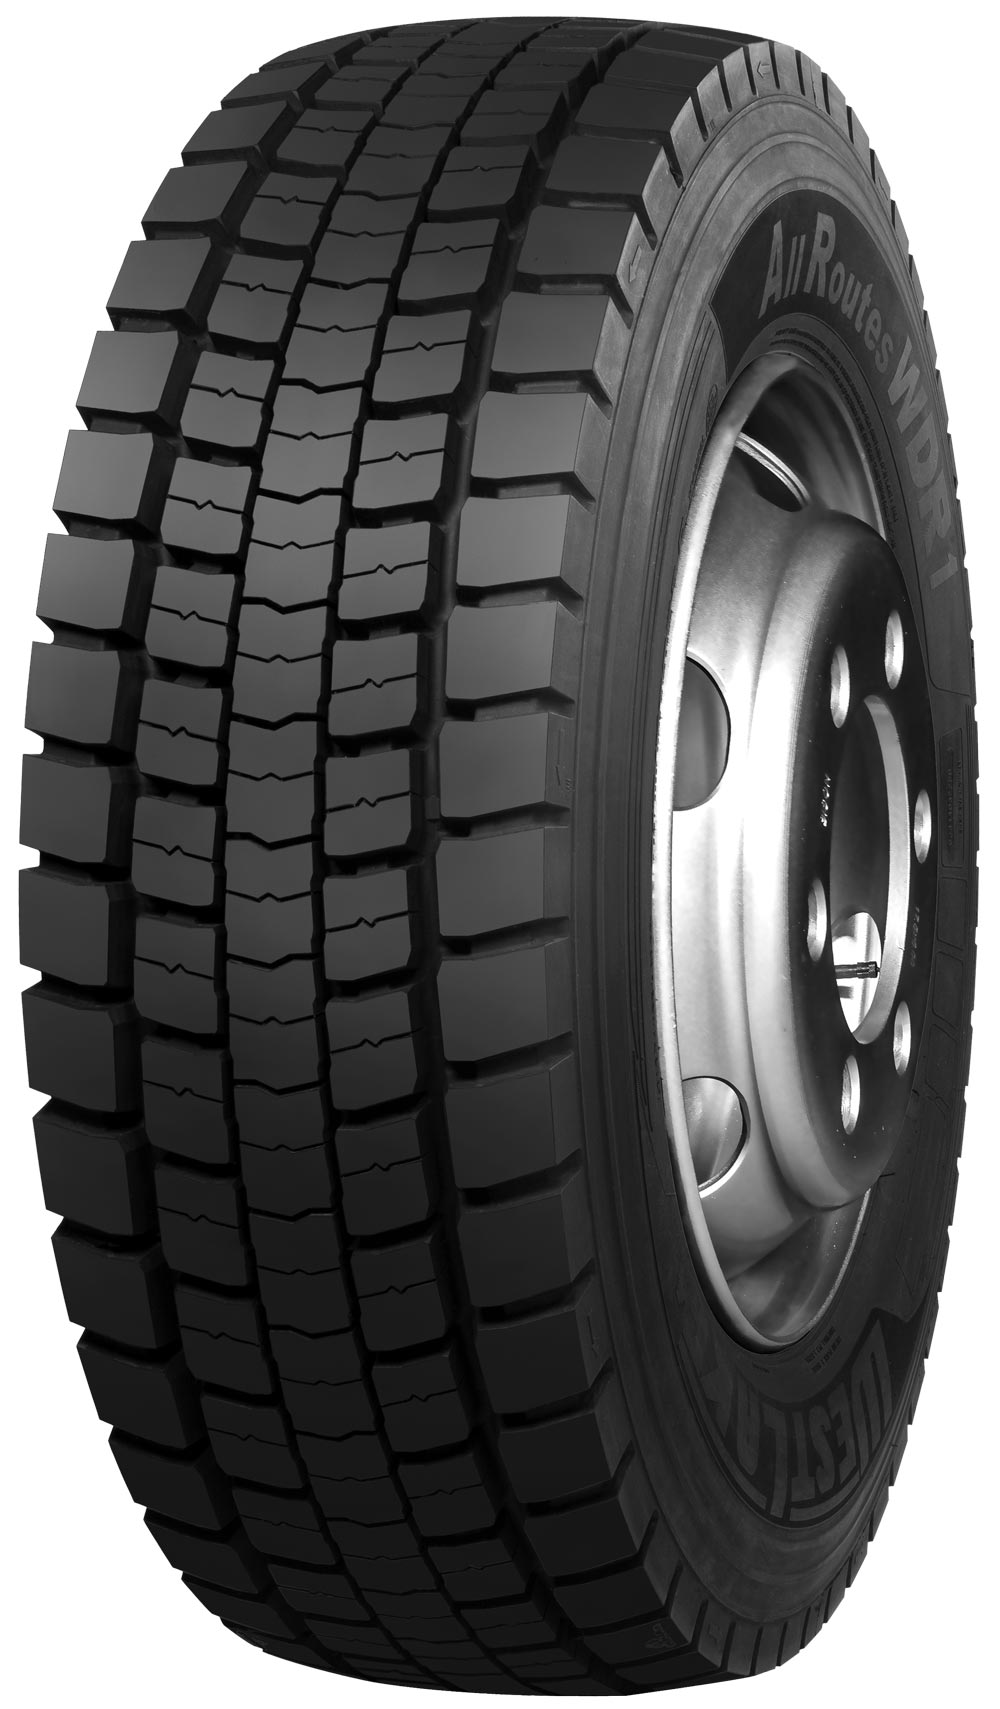 product_type-heavy_tires WESTLAKE WDR1 18PR 295/80 R22.5 152M